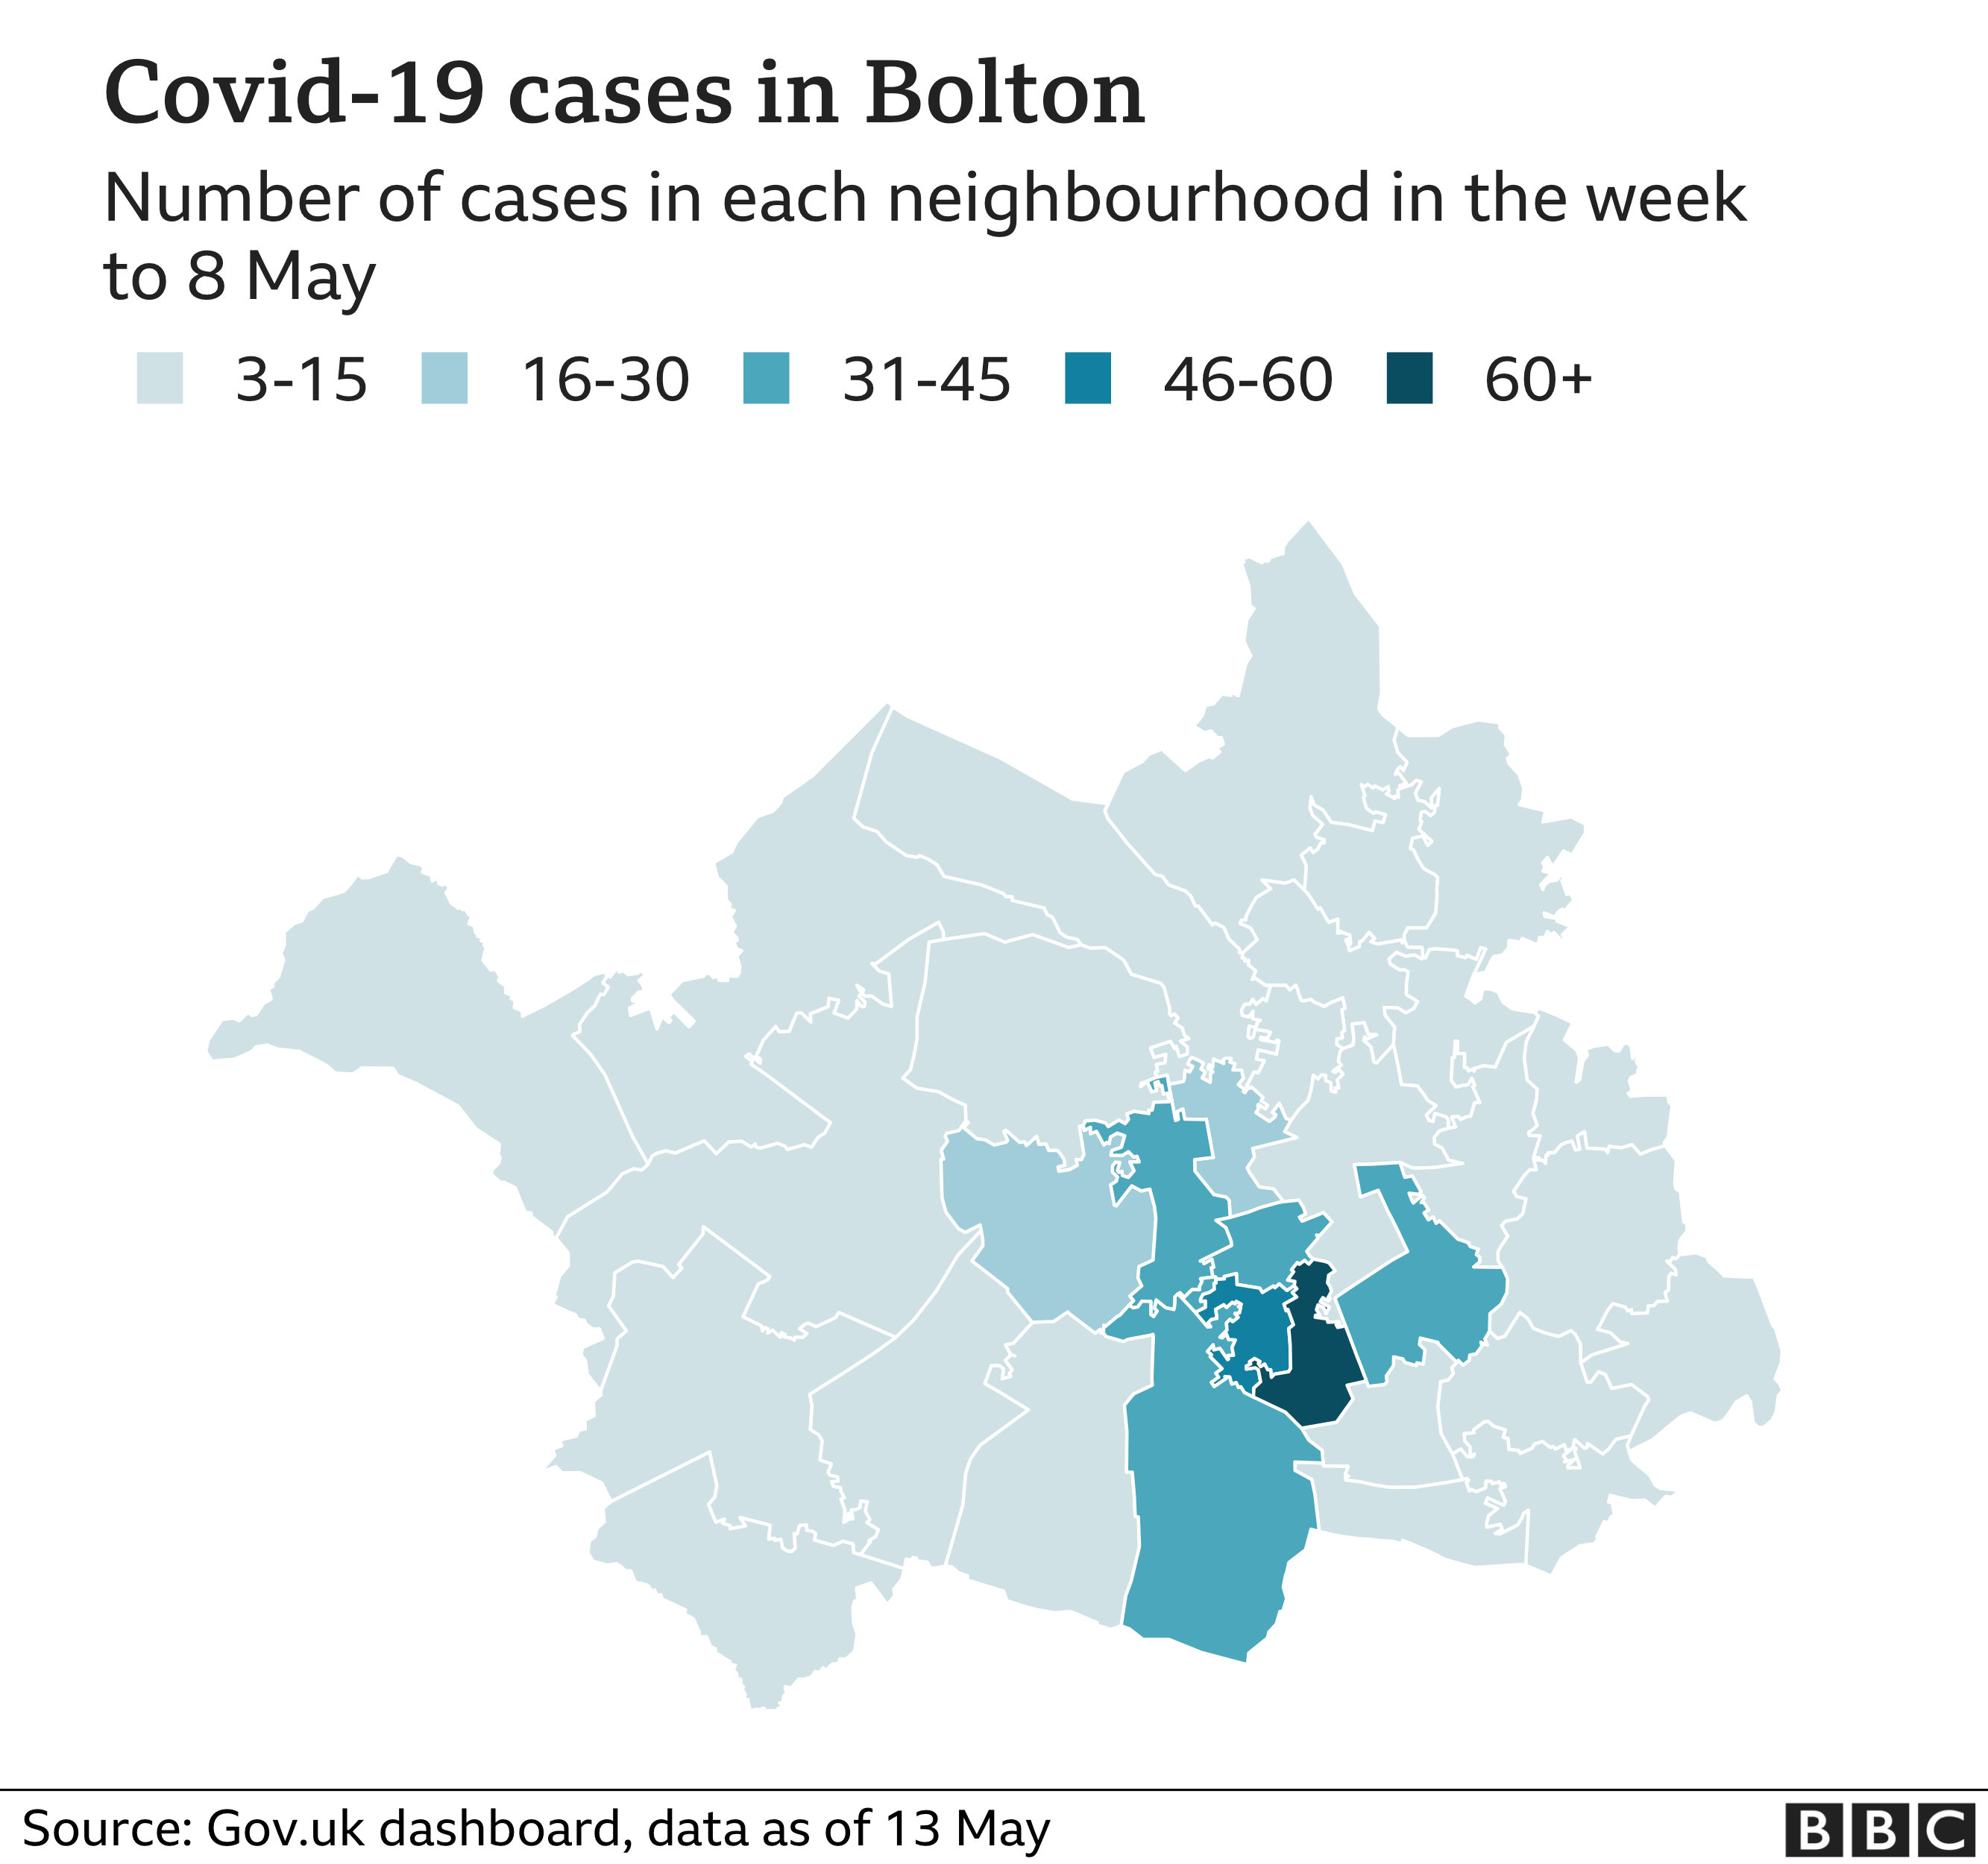 Bolton cases in detail